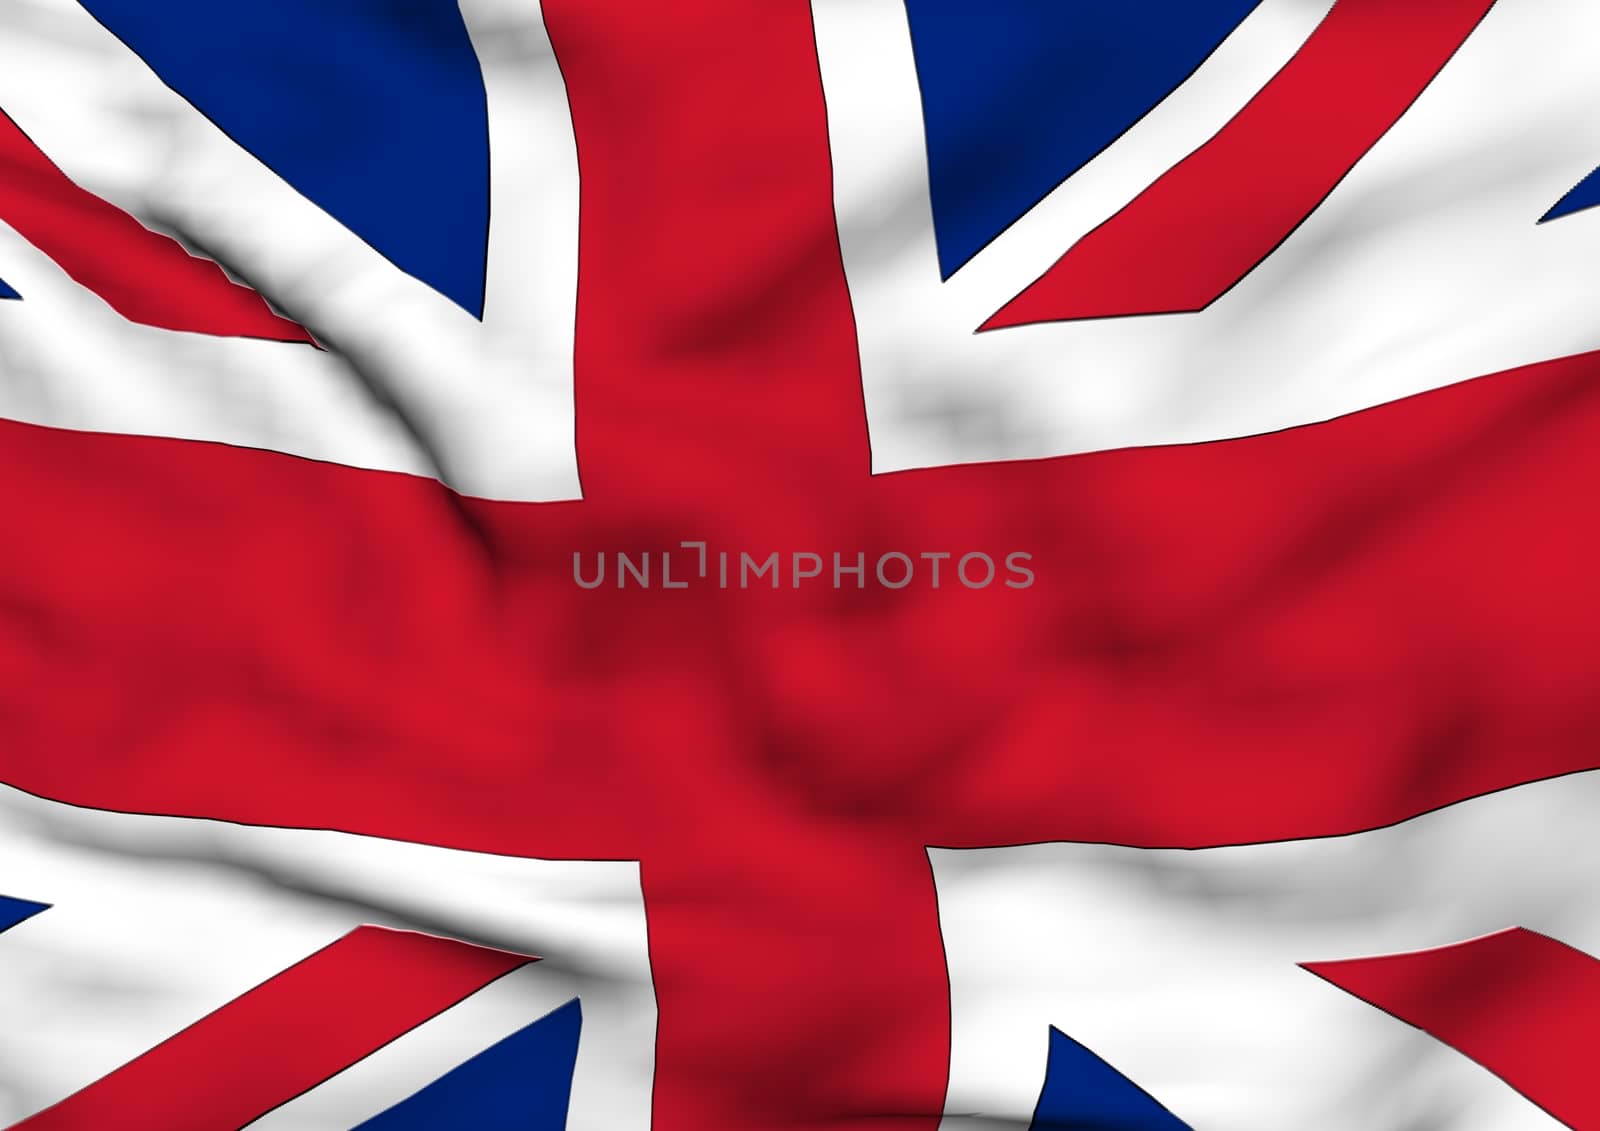 Image of a waving flag of UK